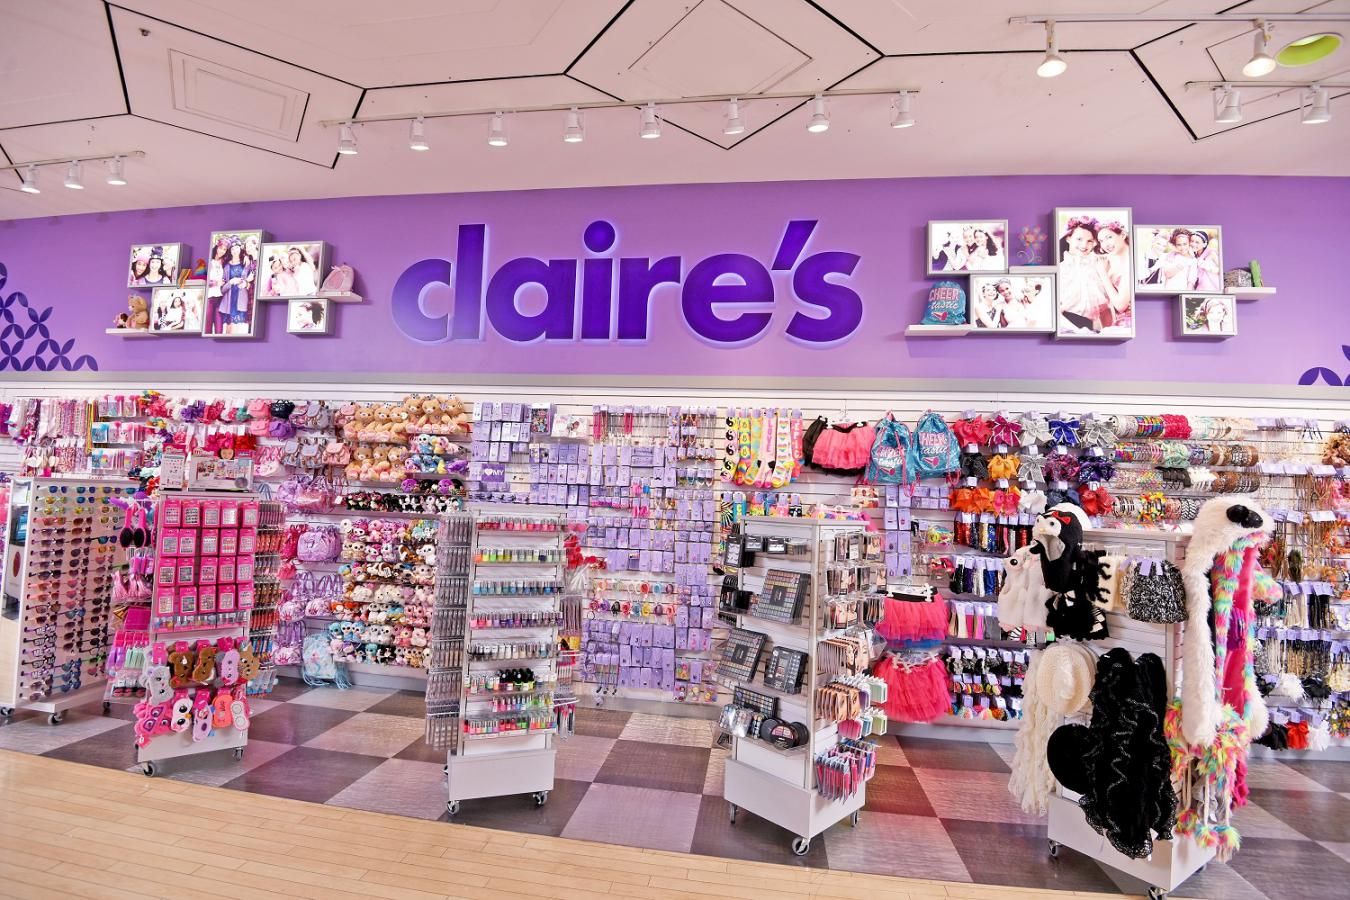 Claire's May Be Going Bankrupt, But These 11 Iconic Styles Will Live In Our Memories Forever